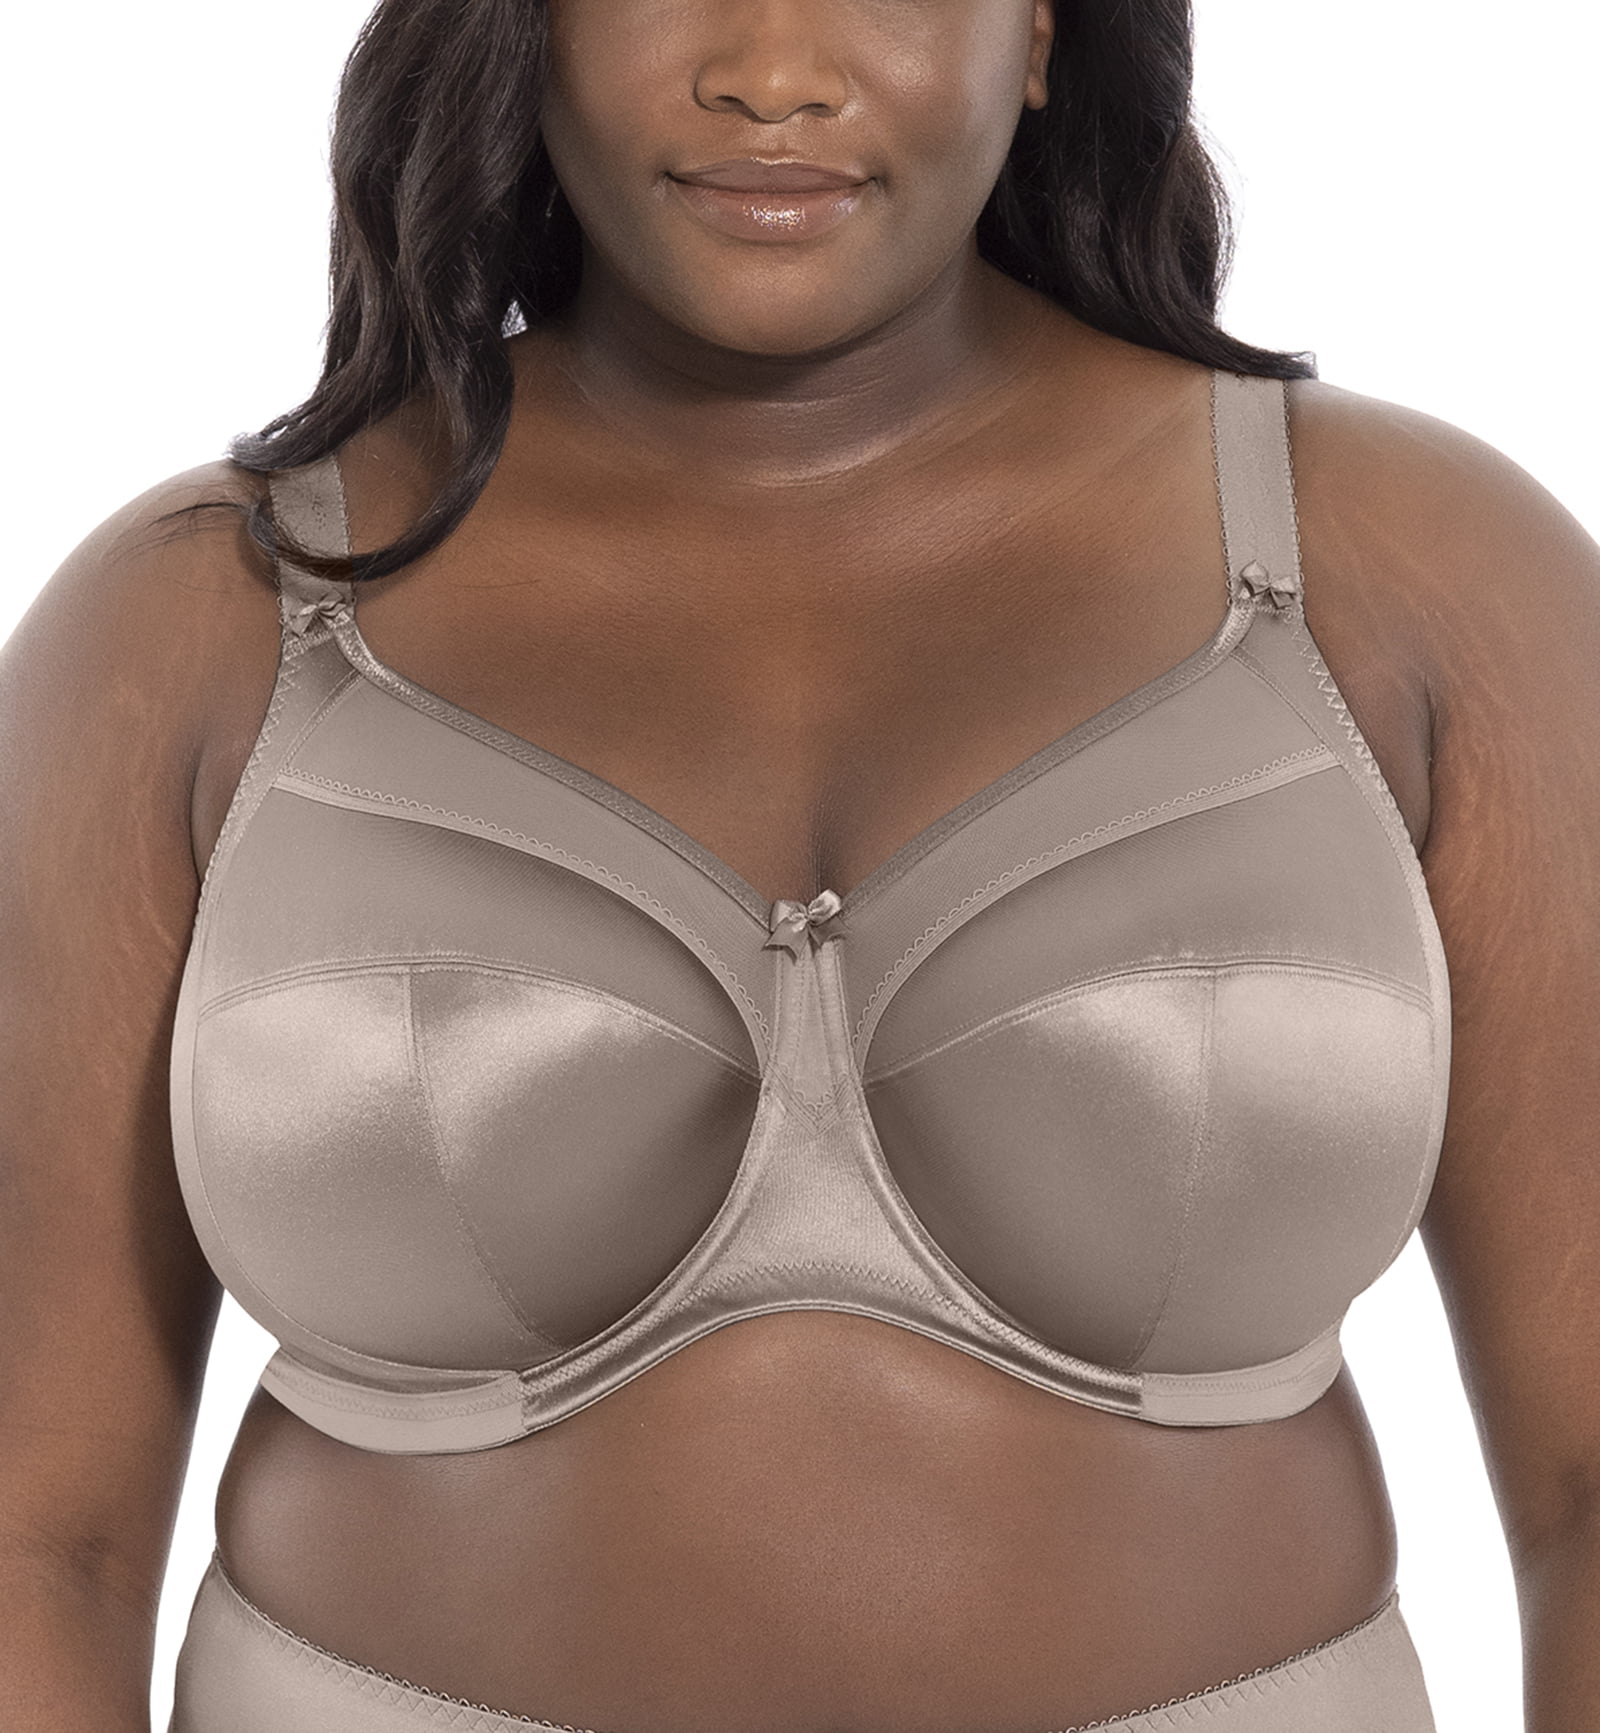 BeWicked 2215-ND-40F Kristy Full Coverage Bra, Nude - Size 40F